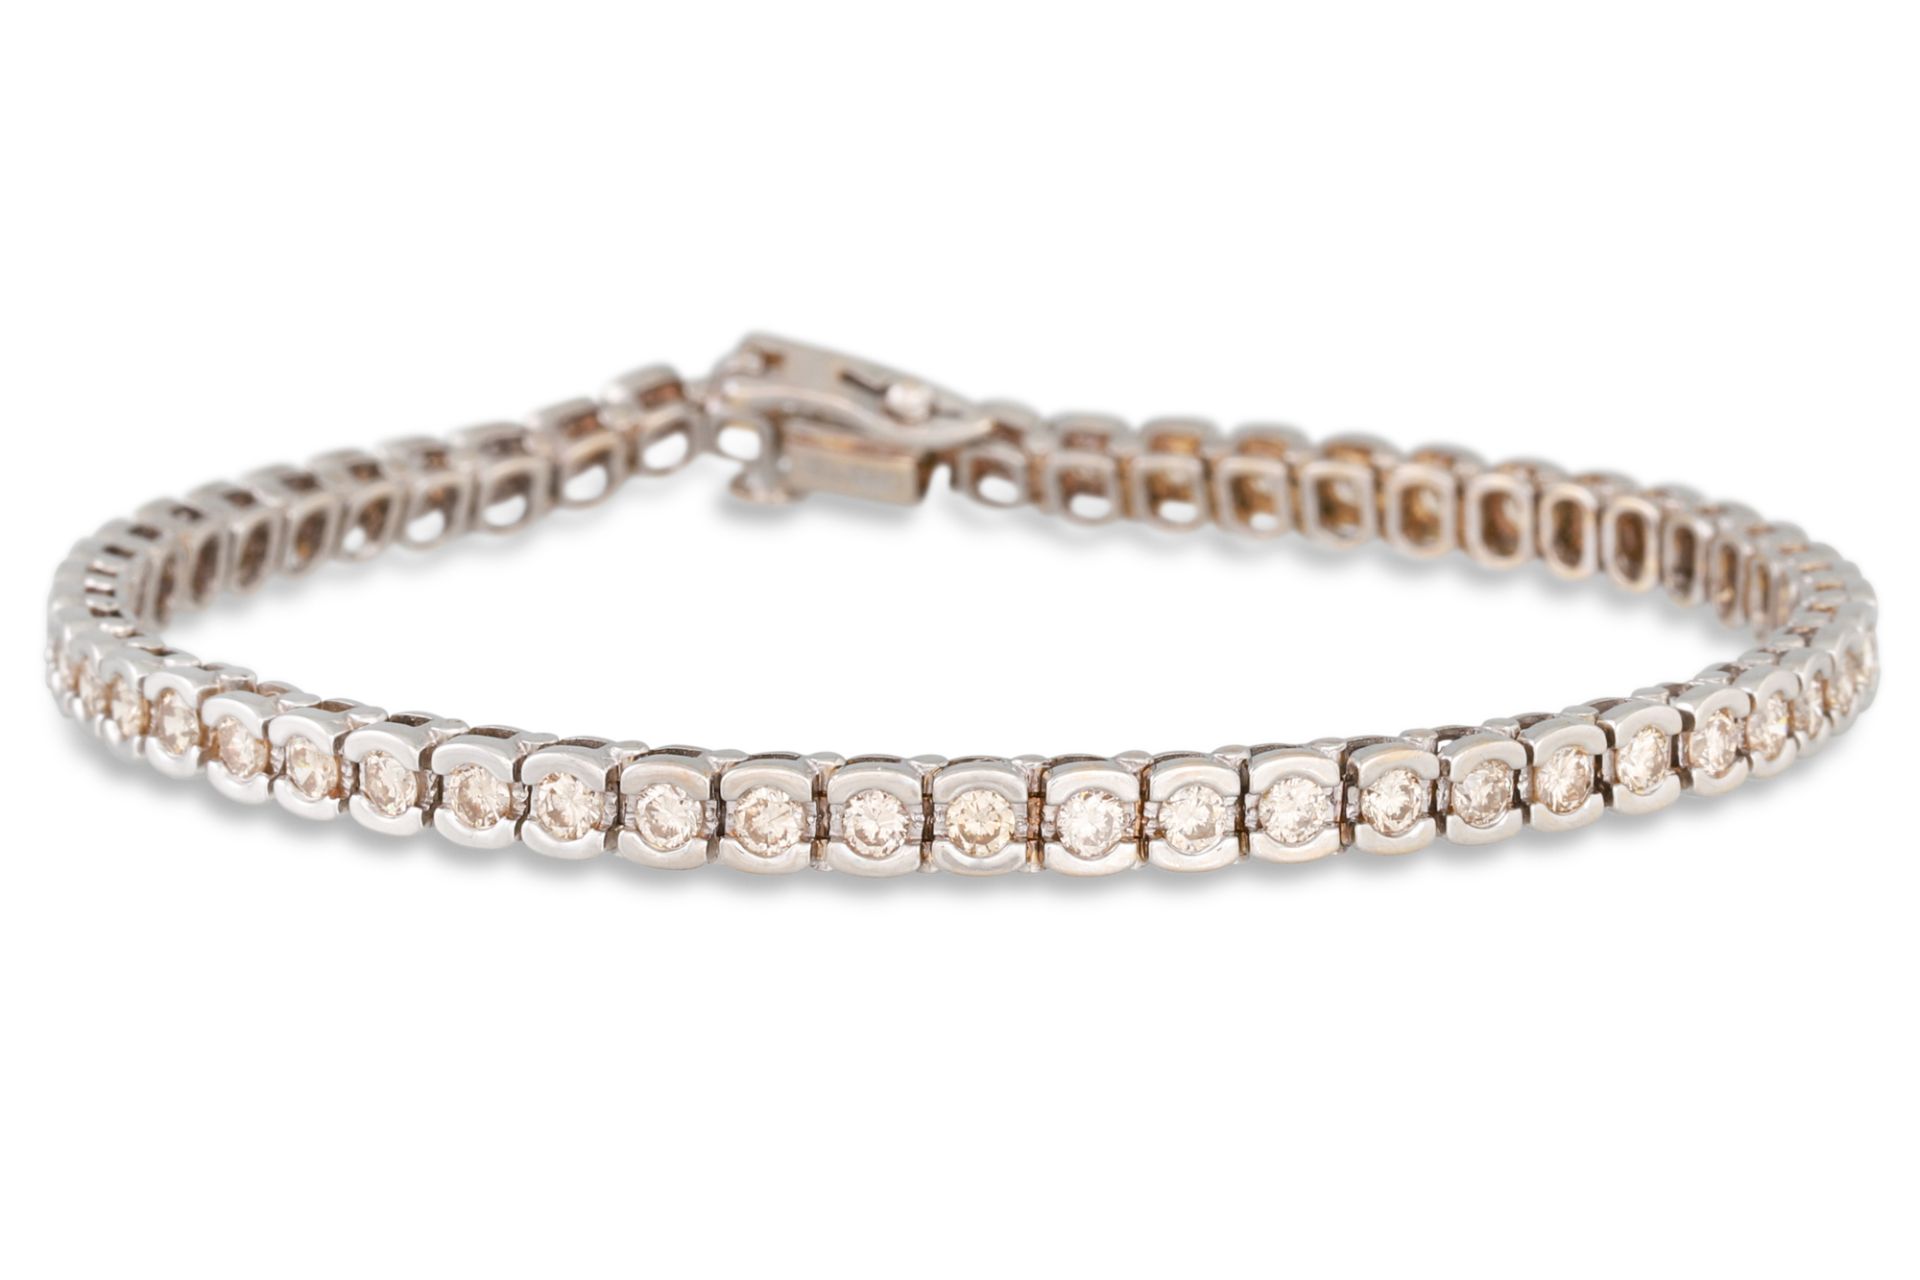 A DIAMOND LINE BRACELET, the brilliant cut diamonds mounted in 18ct gold. Estimated: weight of